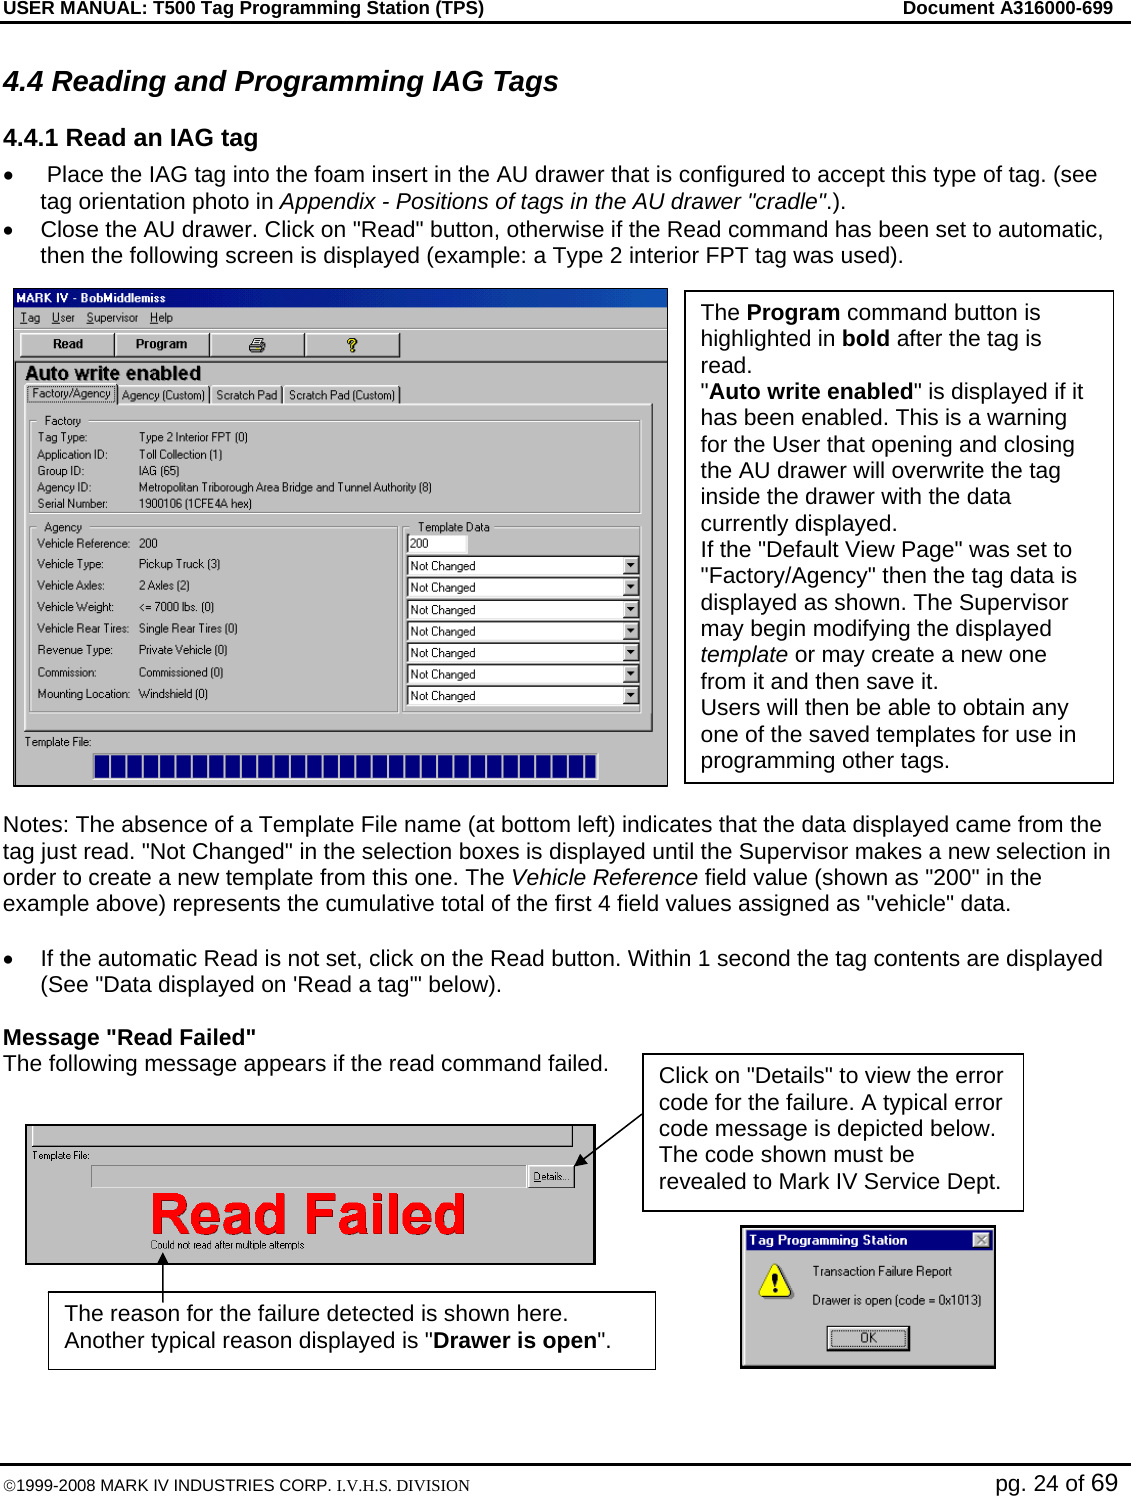 USER MANUAL: T500 Tag Programming Station (TPS)     Document A316000-699  ©1999-2008 MARK IV INDUSTRIES CORP. I.V.H.S. DIVISION   pg. 24 of 69 4.4 Reading and Programming IAG Tags 4.4.1 Read an IAG tag •   Place the IAG tag into the foam insert in the AU drawer that is configured to accept this type of tag. (see tag orientation photo in Appendix - Positions of tags in the AU drawer &quot;cradle&quot;.). •  Close the AU drawer. Click on &quot;Read&quot; button, otherwise if the Read command has been set to automatic, then the following screen is displayed (example: a Type 2 interior FPT tag was used).   Notes: The absence of a Template File name (at bottom left) indicates that the data displayed came from the tag just read. &quot;Not Changed&quot; in the selection boxes is displayed until the Supervisor makes a new selection in order to create a new template from this one. The Vehicle Reference field value (shown as &quot;200&quot; in the example above) represents the cumulative total of the first 4 field values assigned as &quot;vehicle&quot; data.  •  If the automatic Read is not set, click on the Read button. Within 1 second the tag contents are displayed (See &quot;Data displayed on &apos;Read a tag&apos;&quot; below).  Message &quot;Read Failed&quot;  The following message appears if the read command failed.  The Program command button is highlighted in bold after the tag is read.  &quot;Auto write enabled&quot; is displayed if it has been enabled. This is a warning for the User that opening and closing the AU drawer will overwrite the tag inside the drawer with the data currently displayed. If the &quot;Default View Page&quot; was set to &quot;Factory/Agency&quot; then the tag data is displayed as shown. The Supervisor may begin modifying the displayed template or may create a new one from it and then save it.  Users will then be able to obtain any one of the saved templates for use in programming other tags. Click on &quot;Details&quot; to view the error code for the failure. A typical error code message is depicted below. The code shown must be revealed to Mark IV Service Dept. The reason for the failure detected is shown here. Another typical reason displayed is &quot;Drawer is open&quot;. 